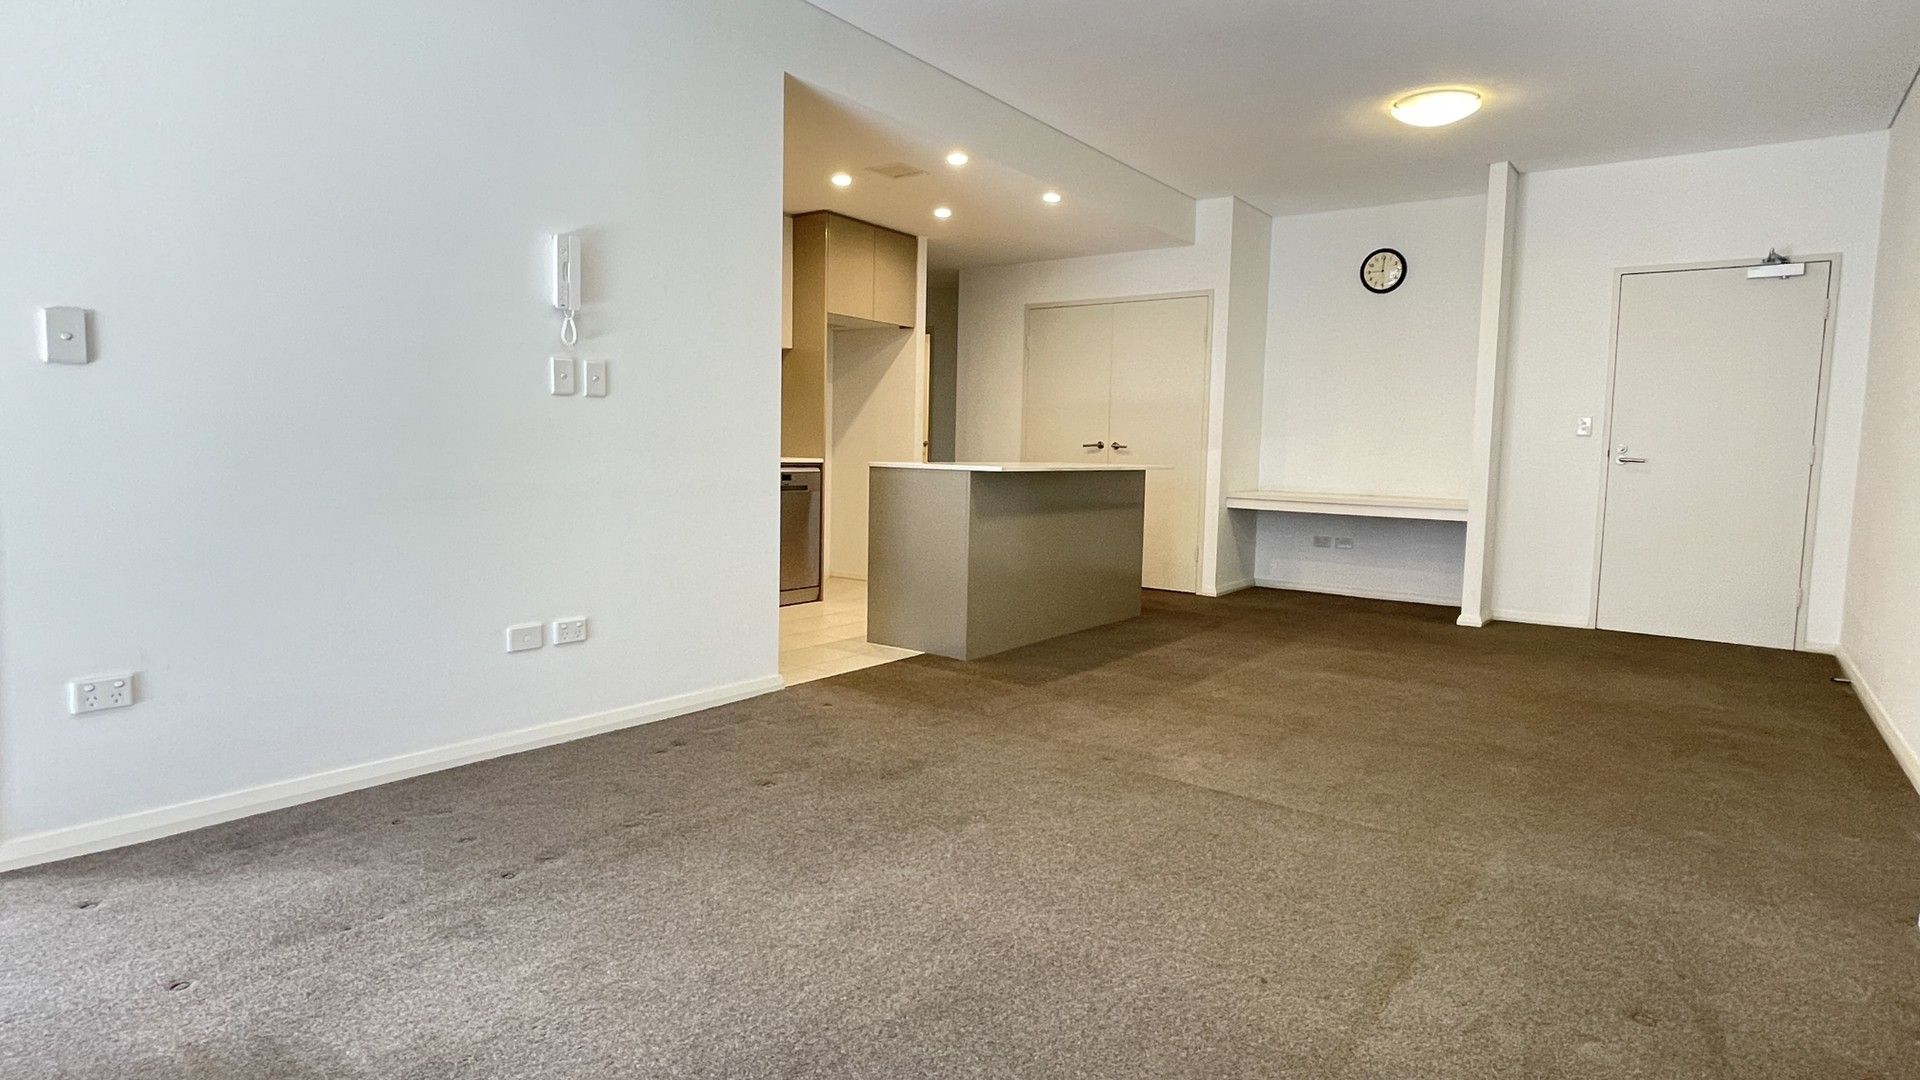 2 bedrooms Apartment / Unit / Flat in 3032/74B Belmore Street RYDE NSW, 2112